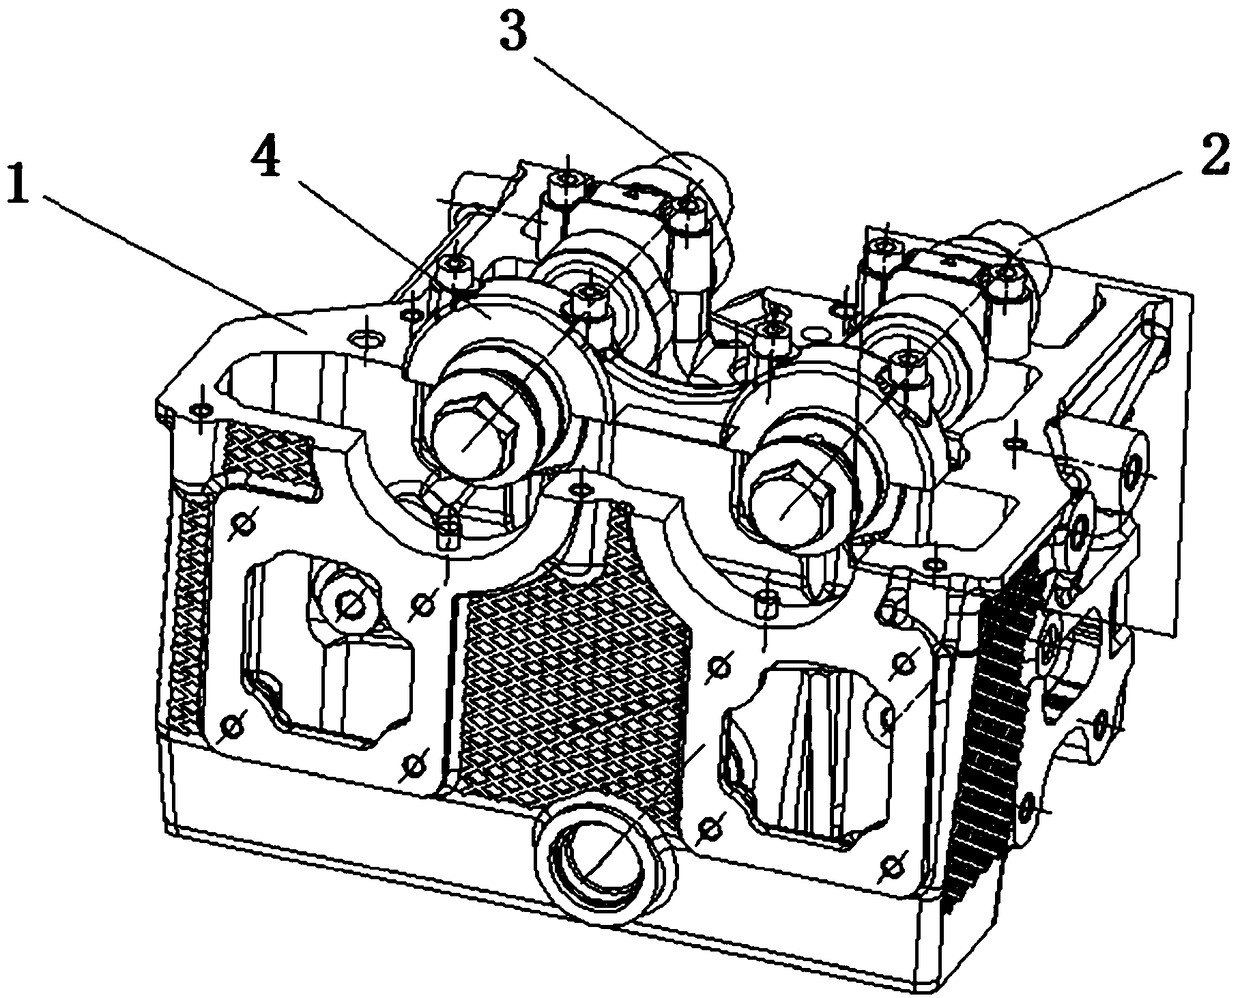 Camshaft bearing cover thrust structure